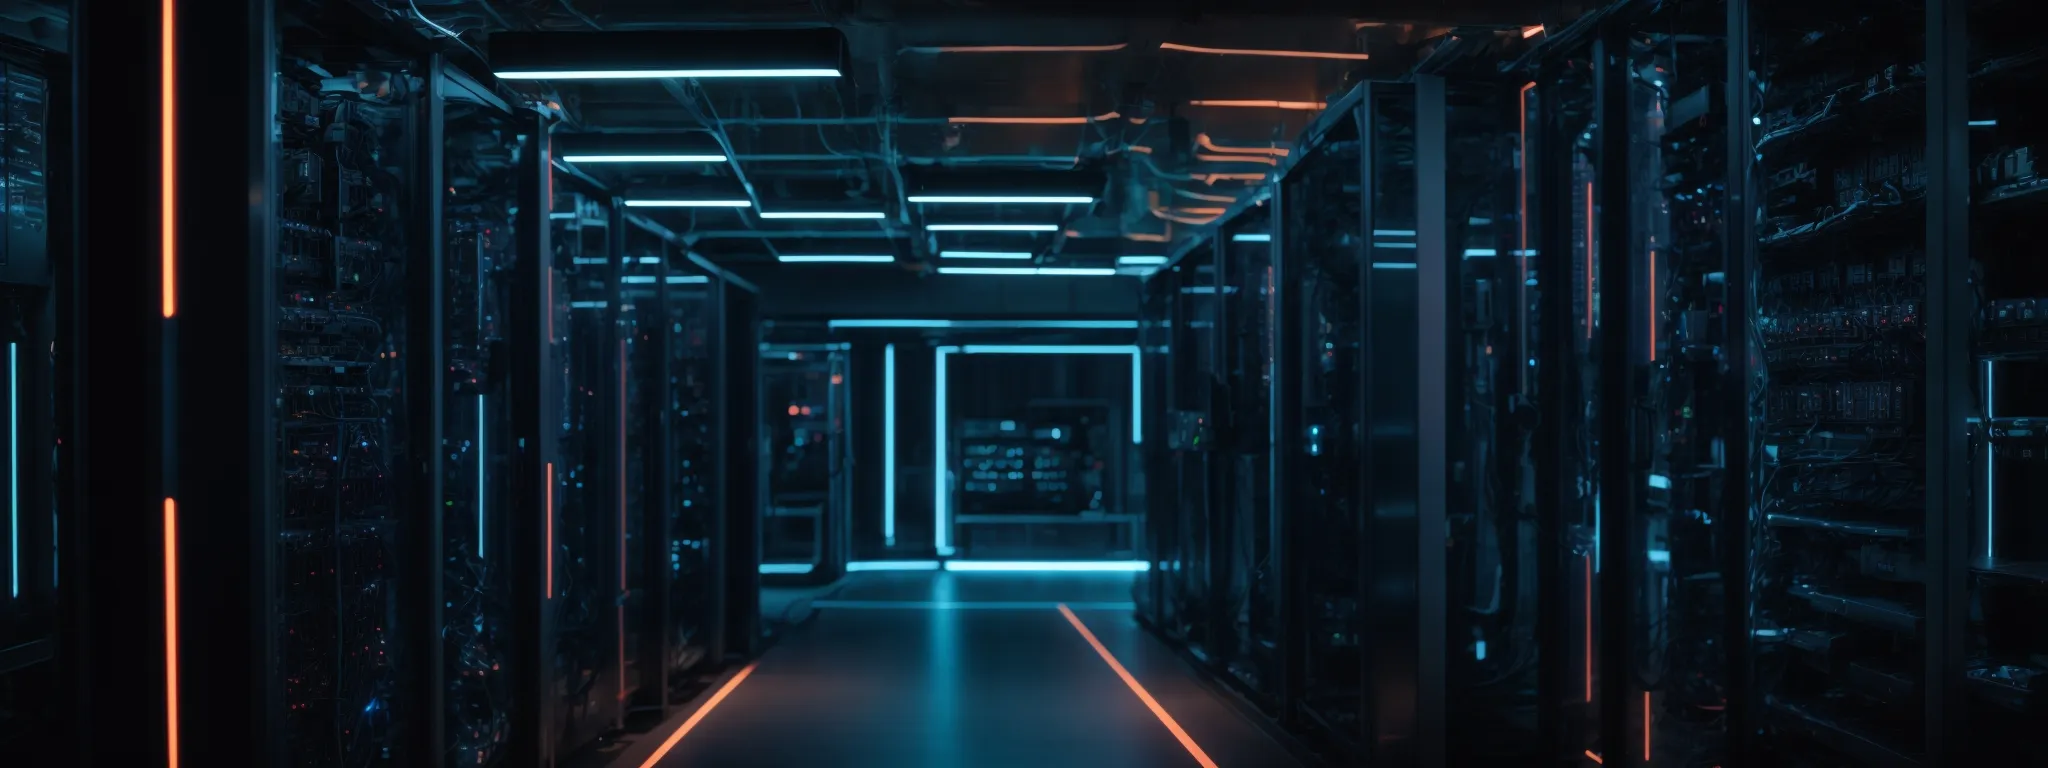 a futuristic server room with glowing lights indicating an active and complex network infrastructure.